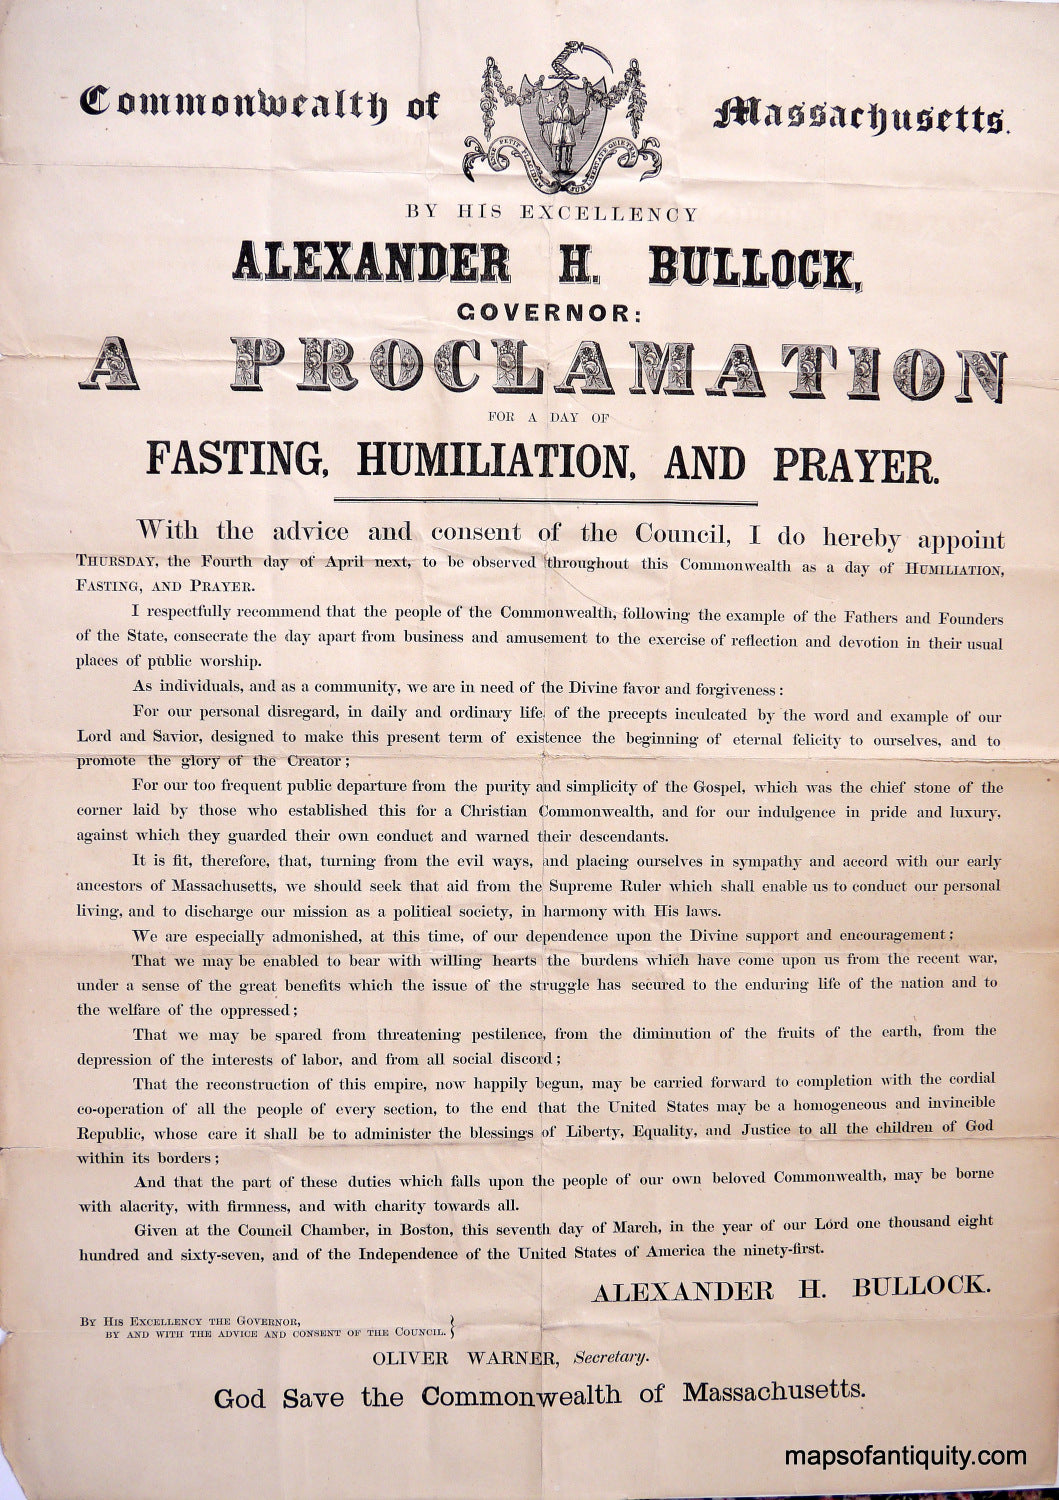 Black-&-White-Printed-Broadside-Proclamation-for-a-Day-of-Fasting-Humiliation-and-Prayer-United-States-Massachusetts-1867-Commonwealth-of-Massachusetts-Maps-Of-Antiquity